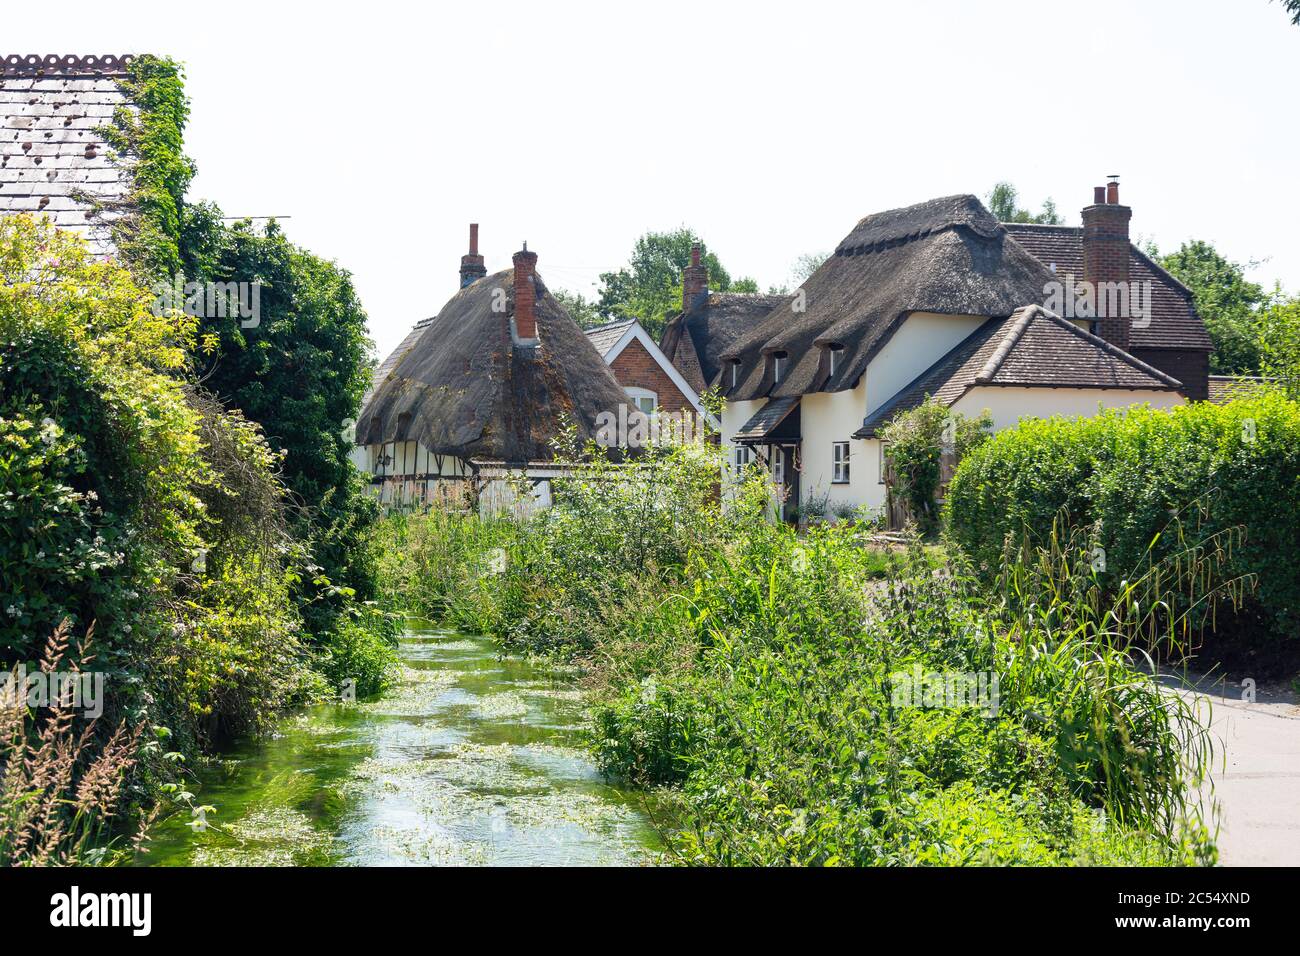 Thatched cottages and River Lambourn, Back Street, Eastbury, Berkshire, England, United Kingdom Stock Photo